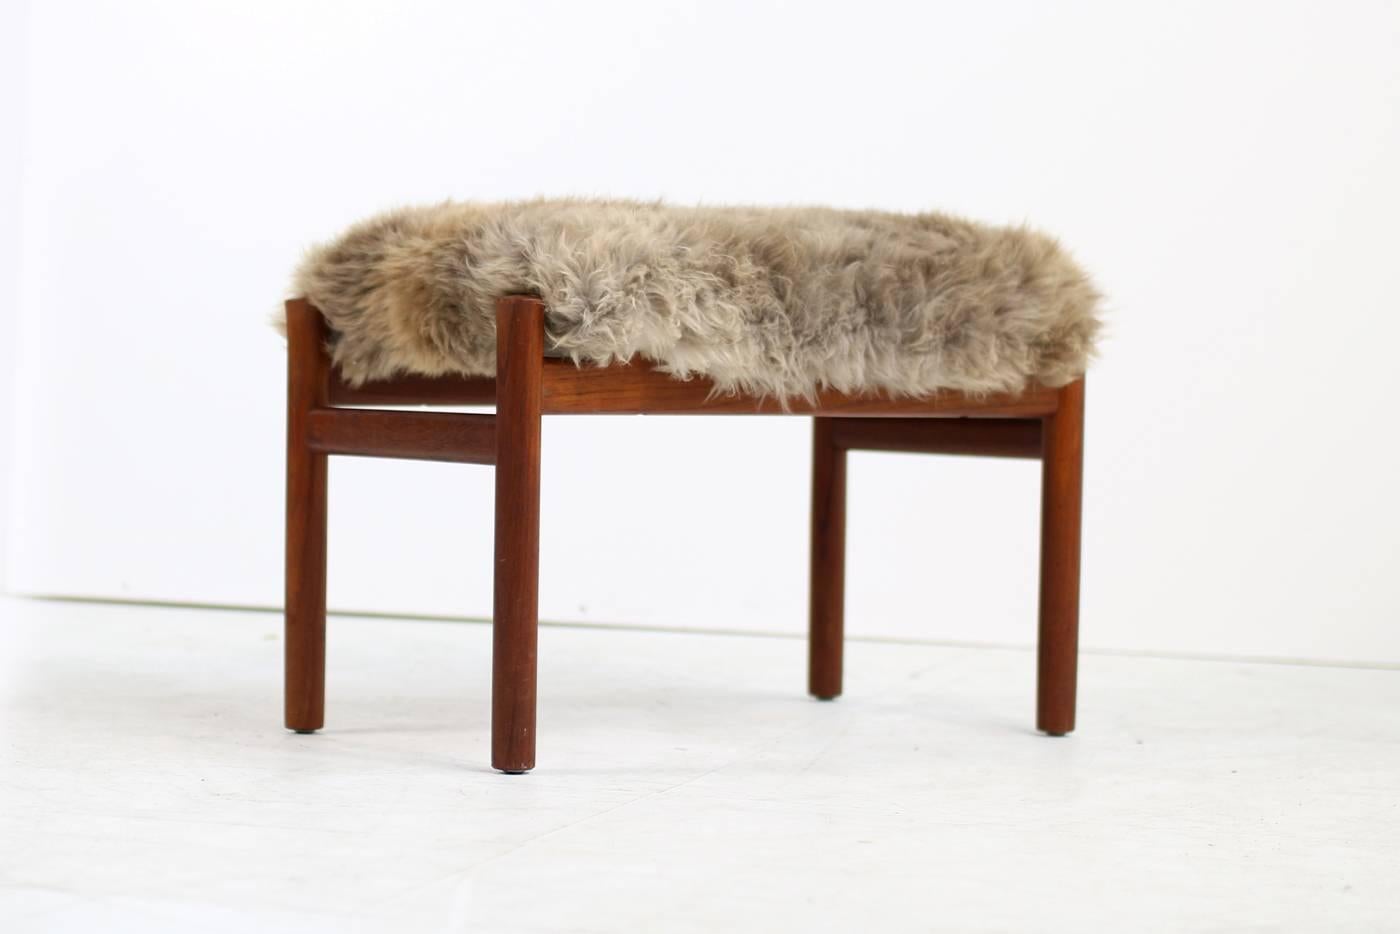 Fantastic 1960s danish modern teak stool with real sheepskin upholstery in a beautiful natural tone. The teak base is made of solid teak wood, great condition. In the style of Philip Arctander and Mogens Lassen or Flemming Lassen, exact designer